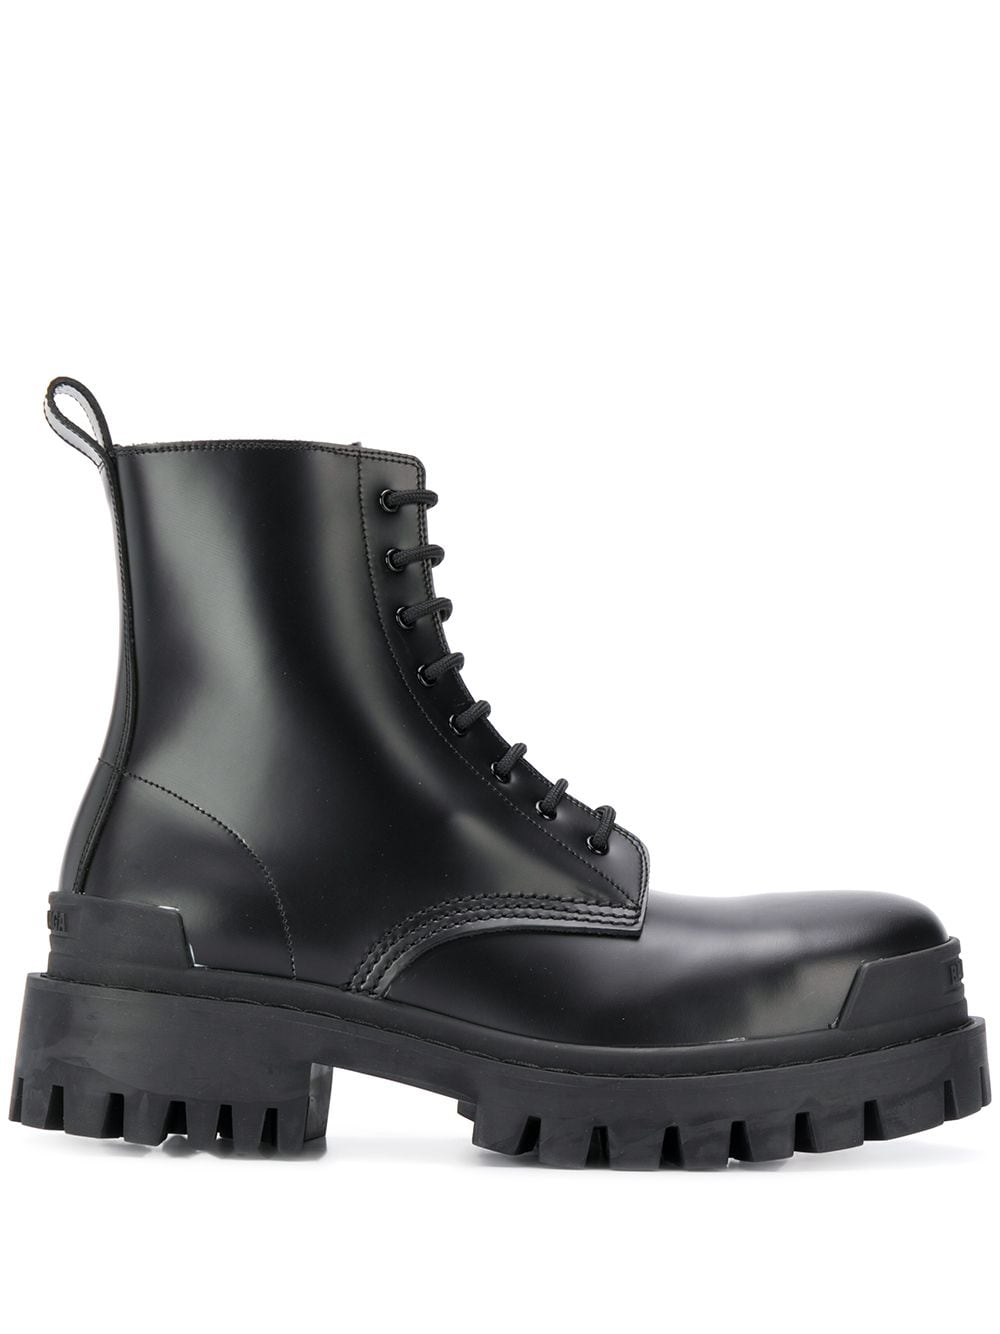 Balenciaga military-style ankle boots 